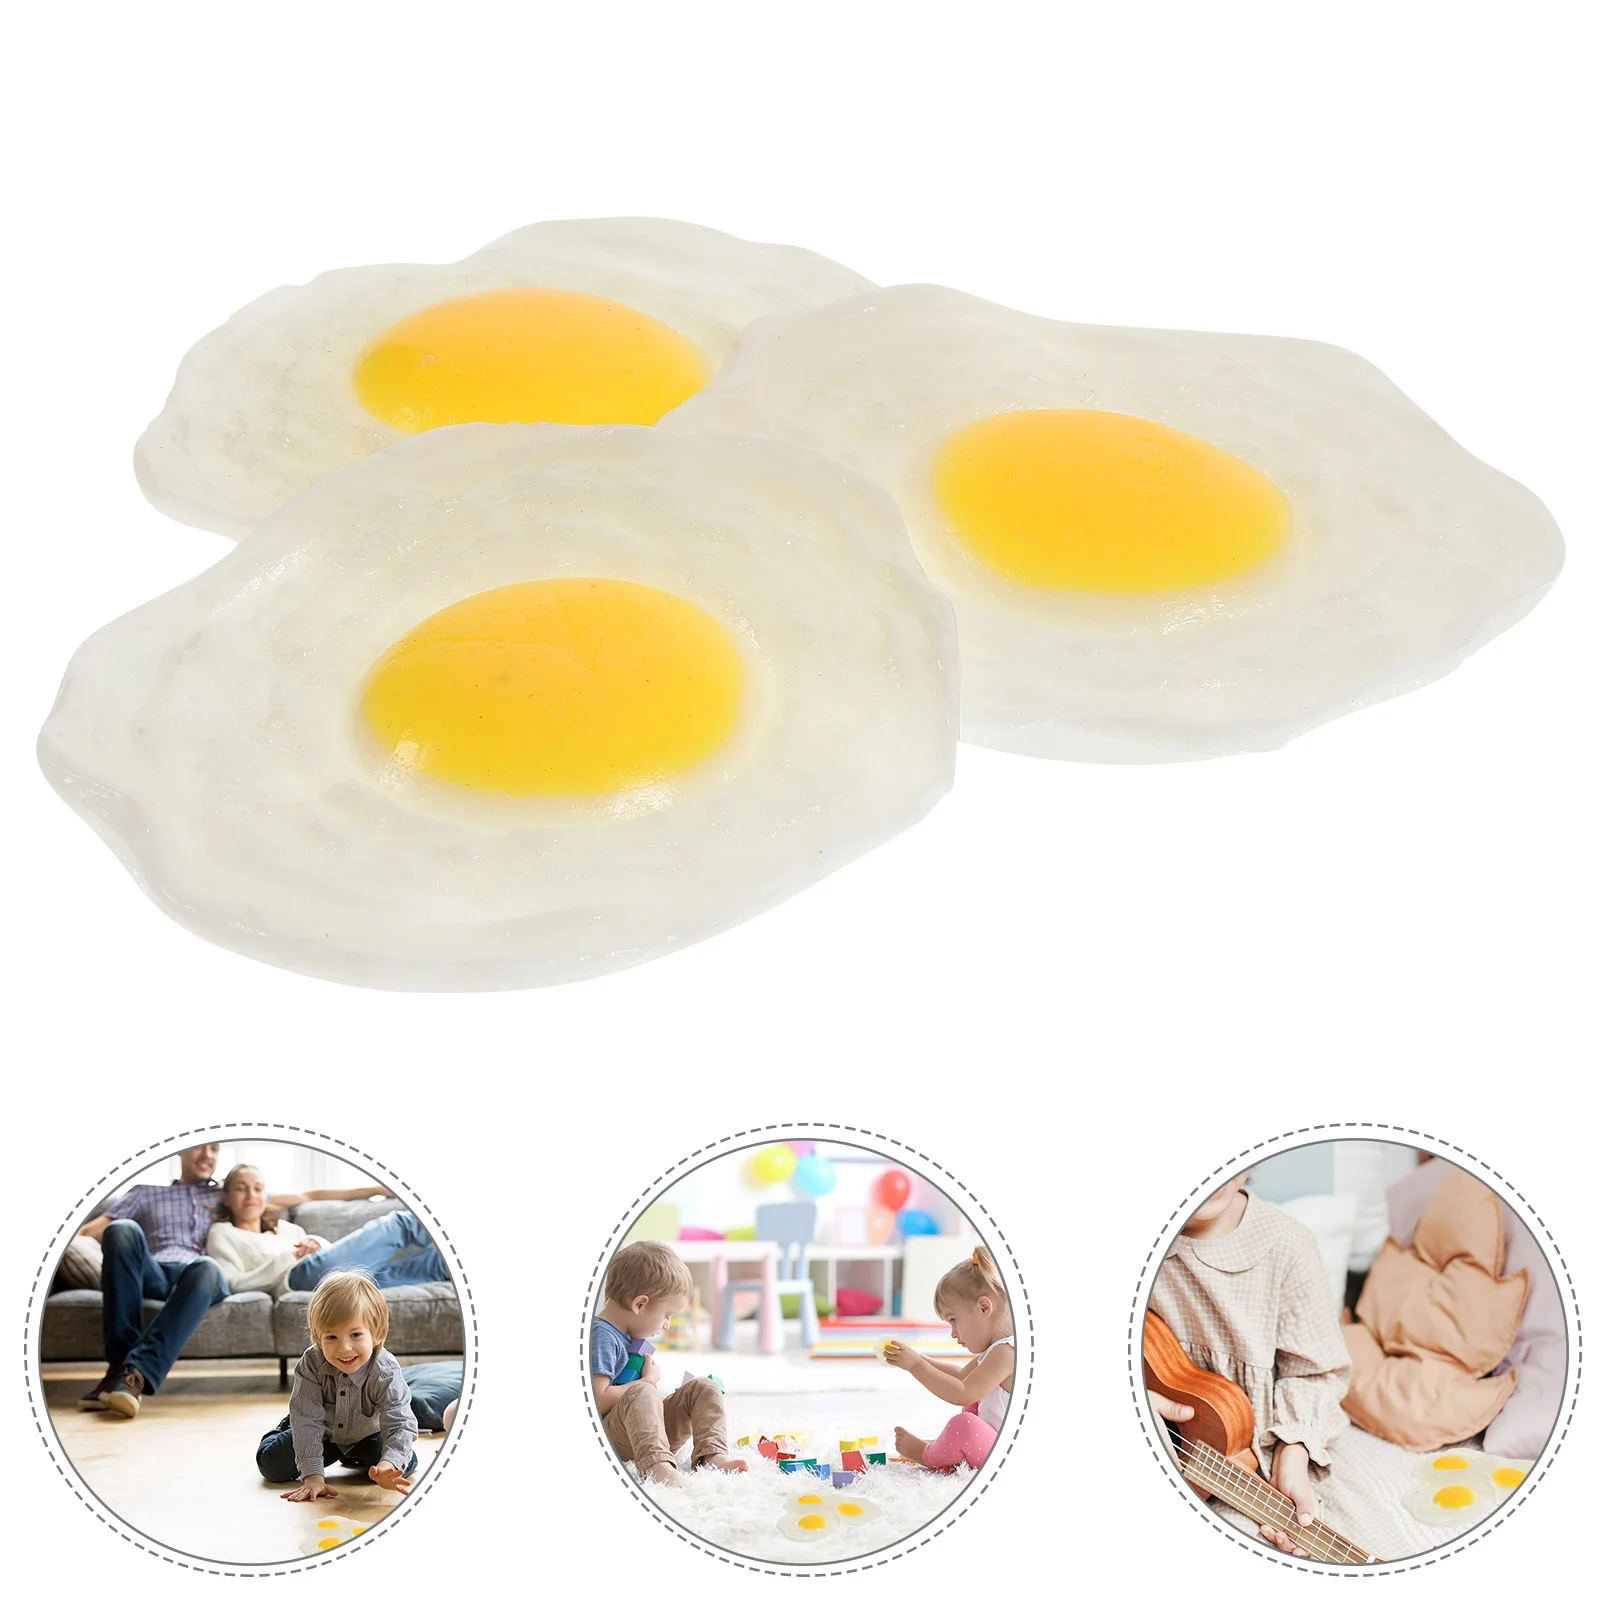 

Toys Toy Egg Fried Stress Kids Decompression Fidget Sensory Squeeze Fake Easter Play Anti Artificial Simulation Hand Cartoon